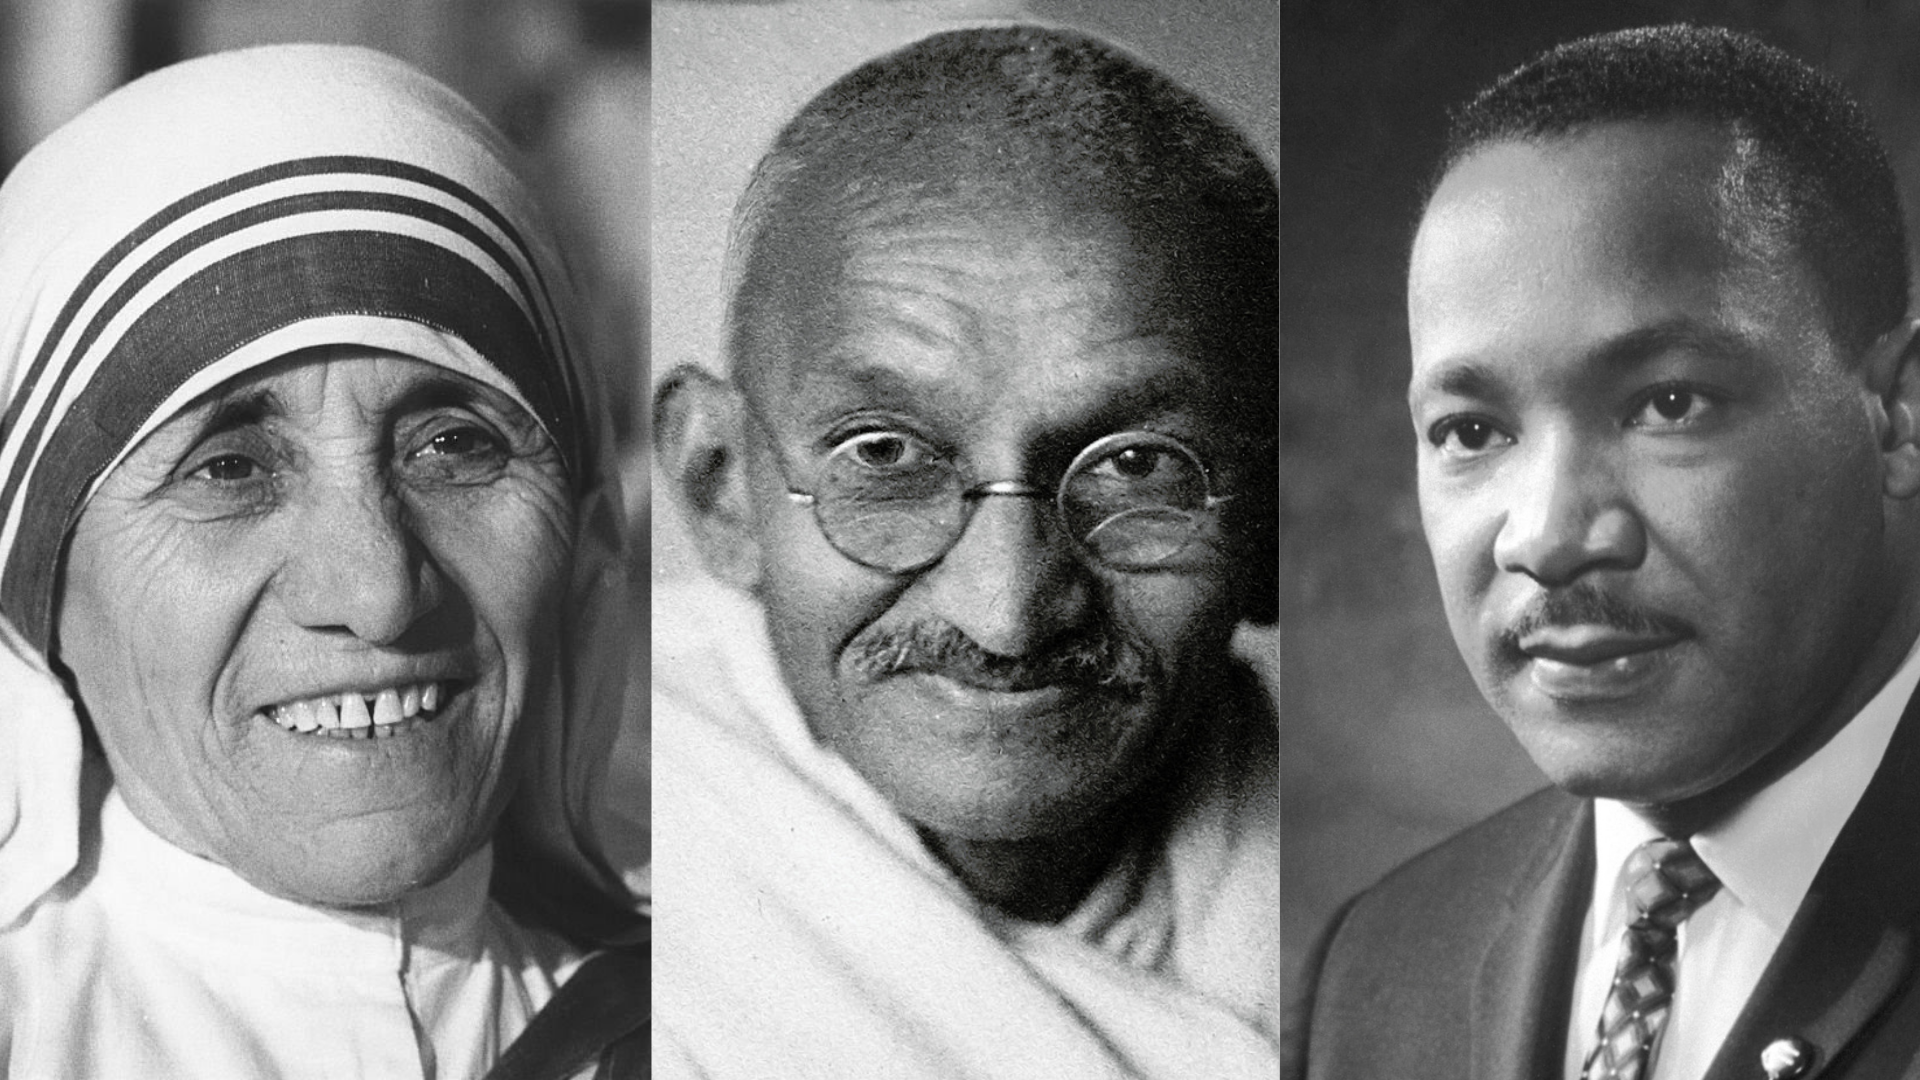 Mother Teresa, Ghandi, Martin Luther King Jr serving their purpose and higher calling.